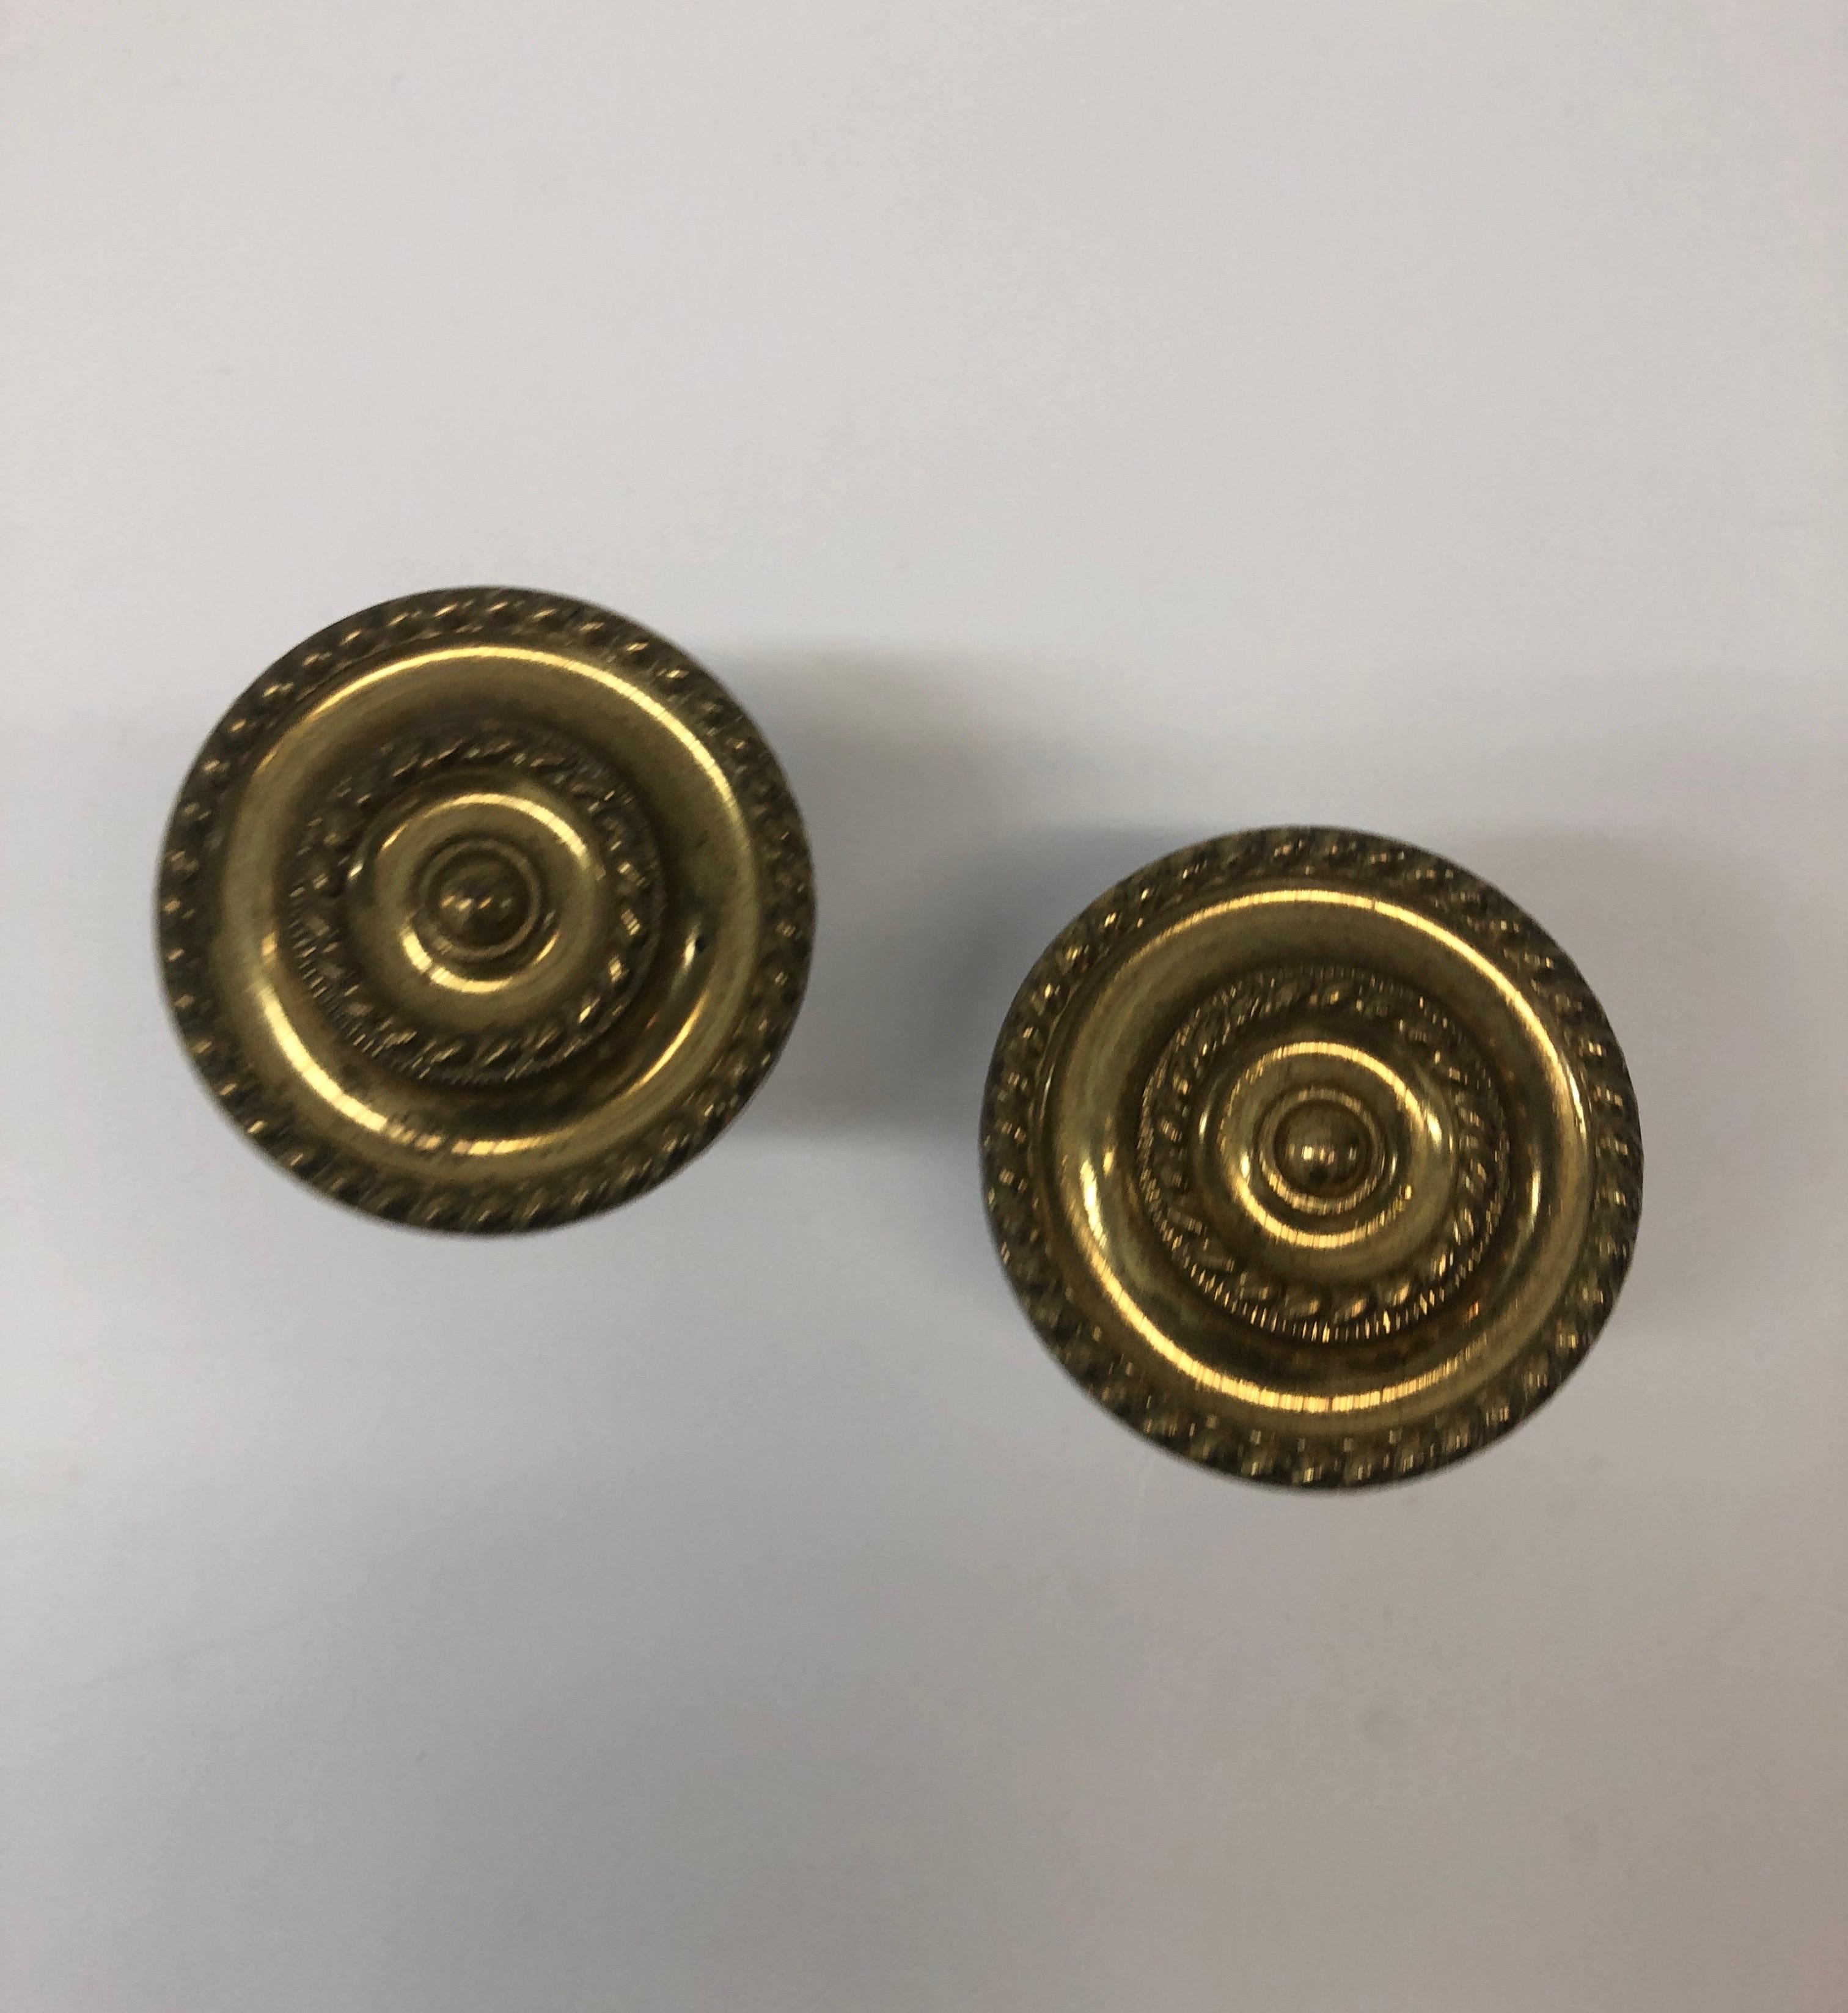 Pair of Vintage Polished Brass Curtain Tiebacks In Good Condition For Sale In Oakland Park, FL